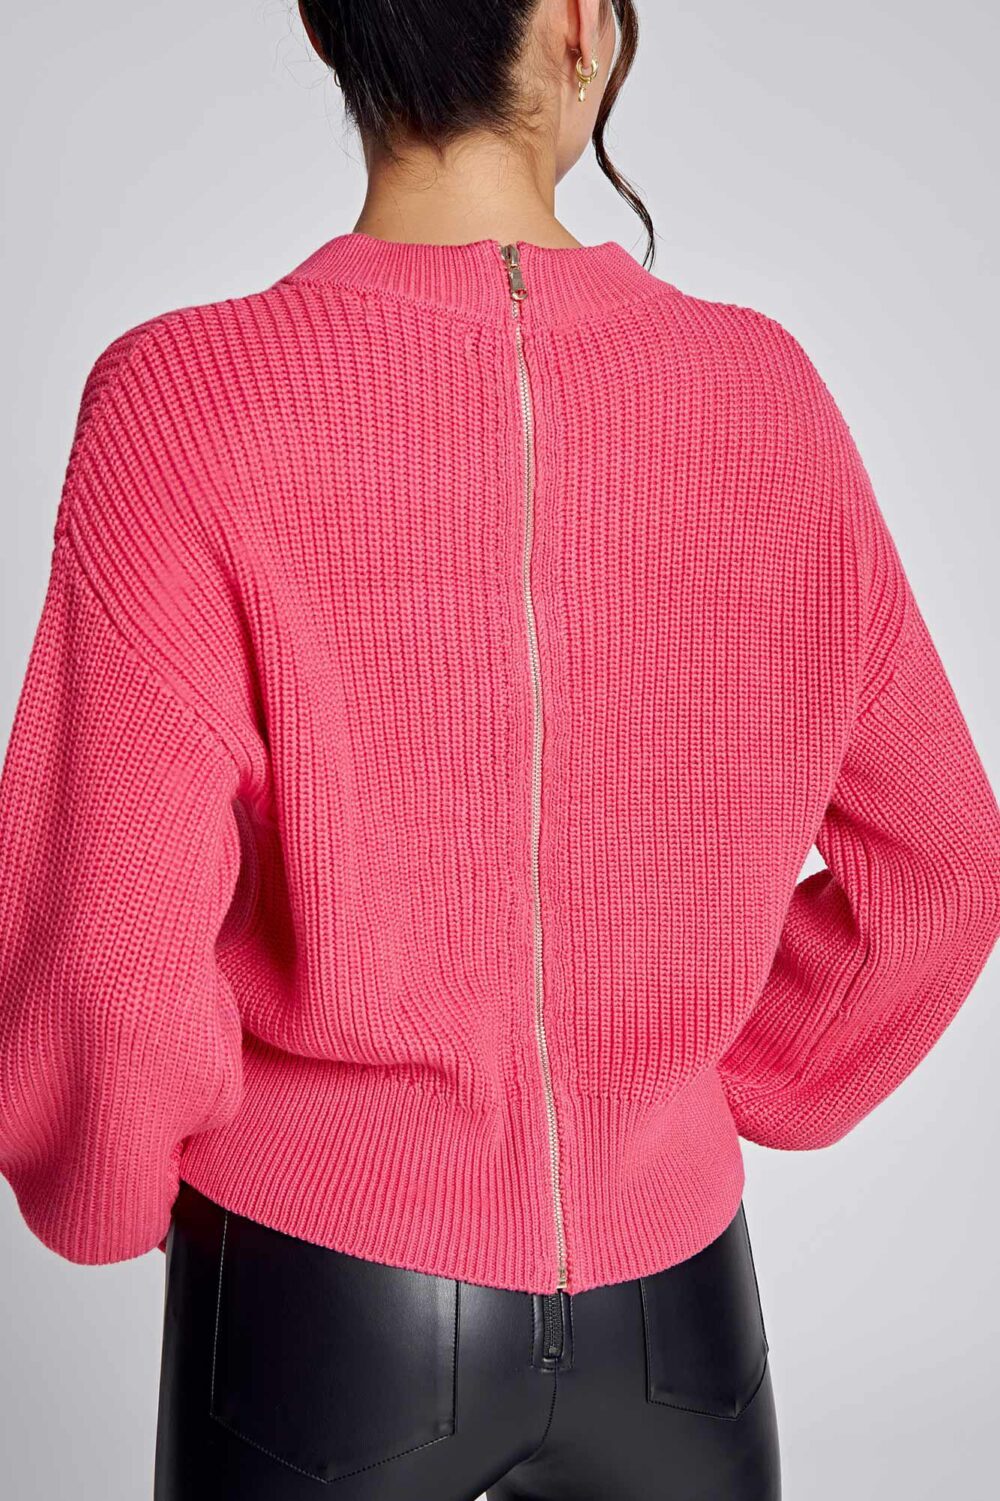 Ladies Top Colour is Hot/pink